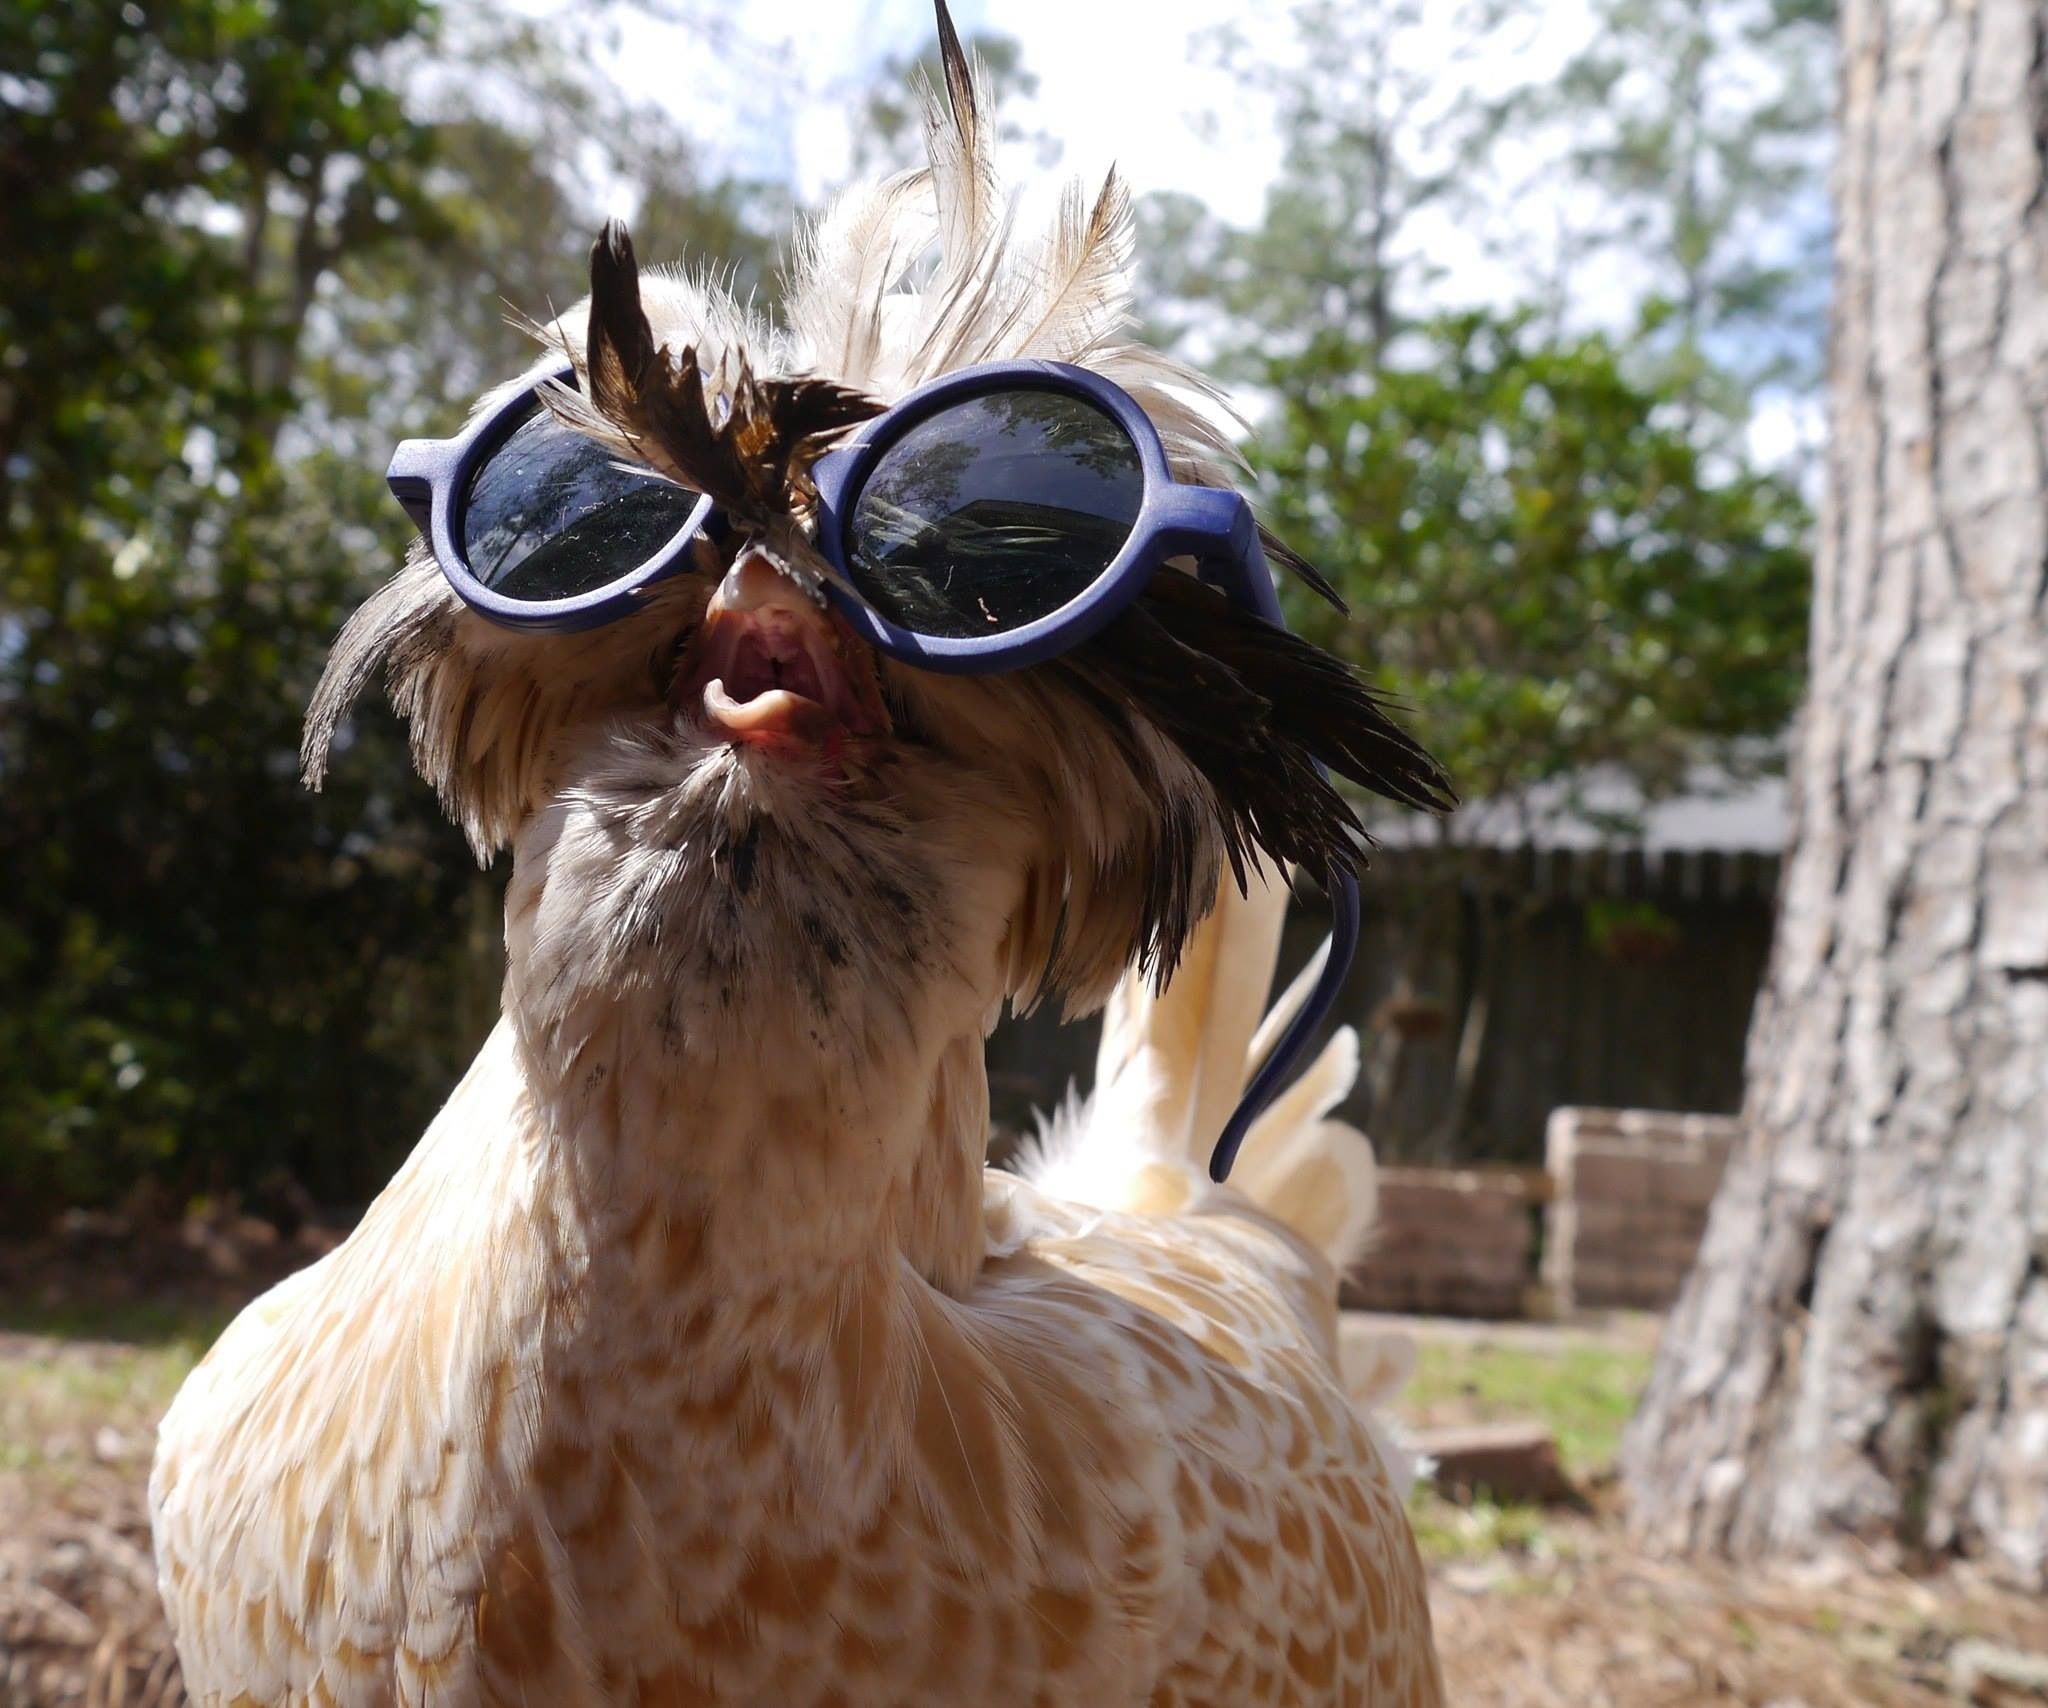 You may be cool, but you'll never be chicken wearing glasses cool.